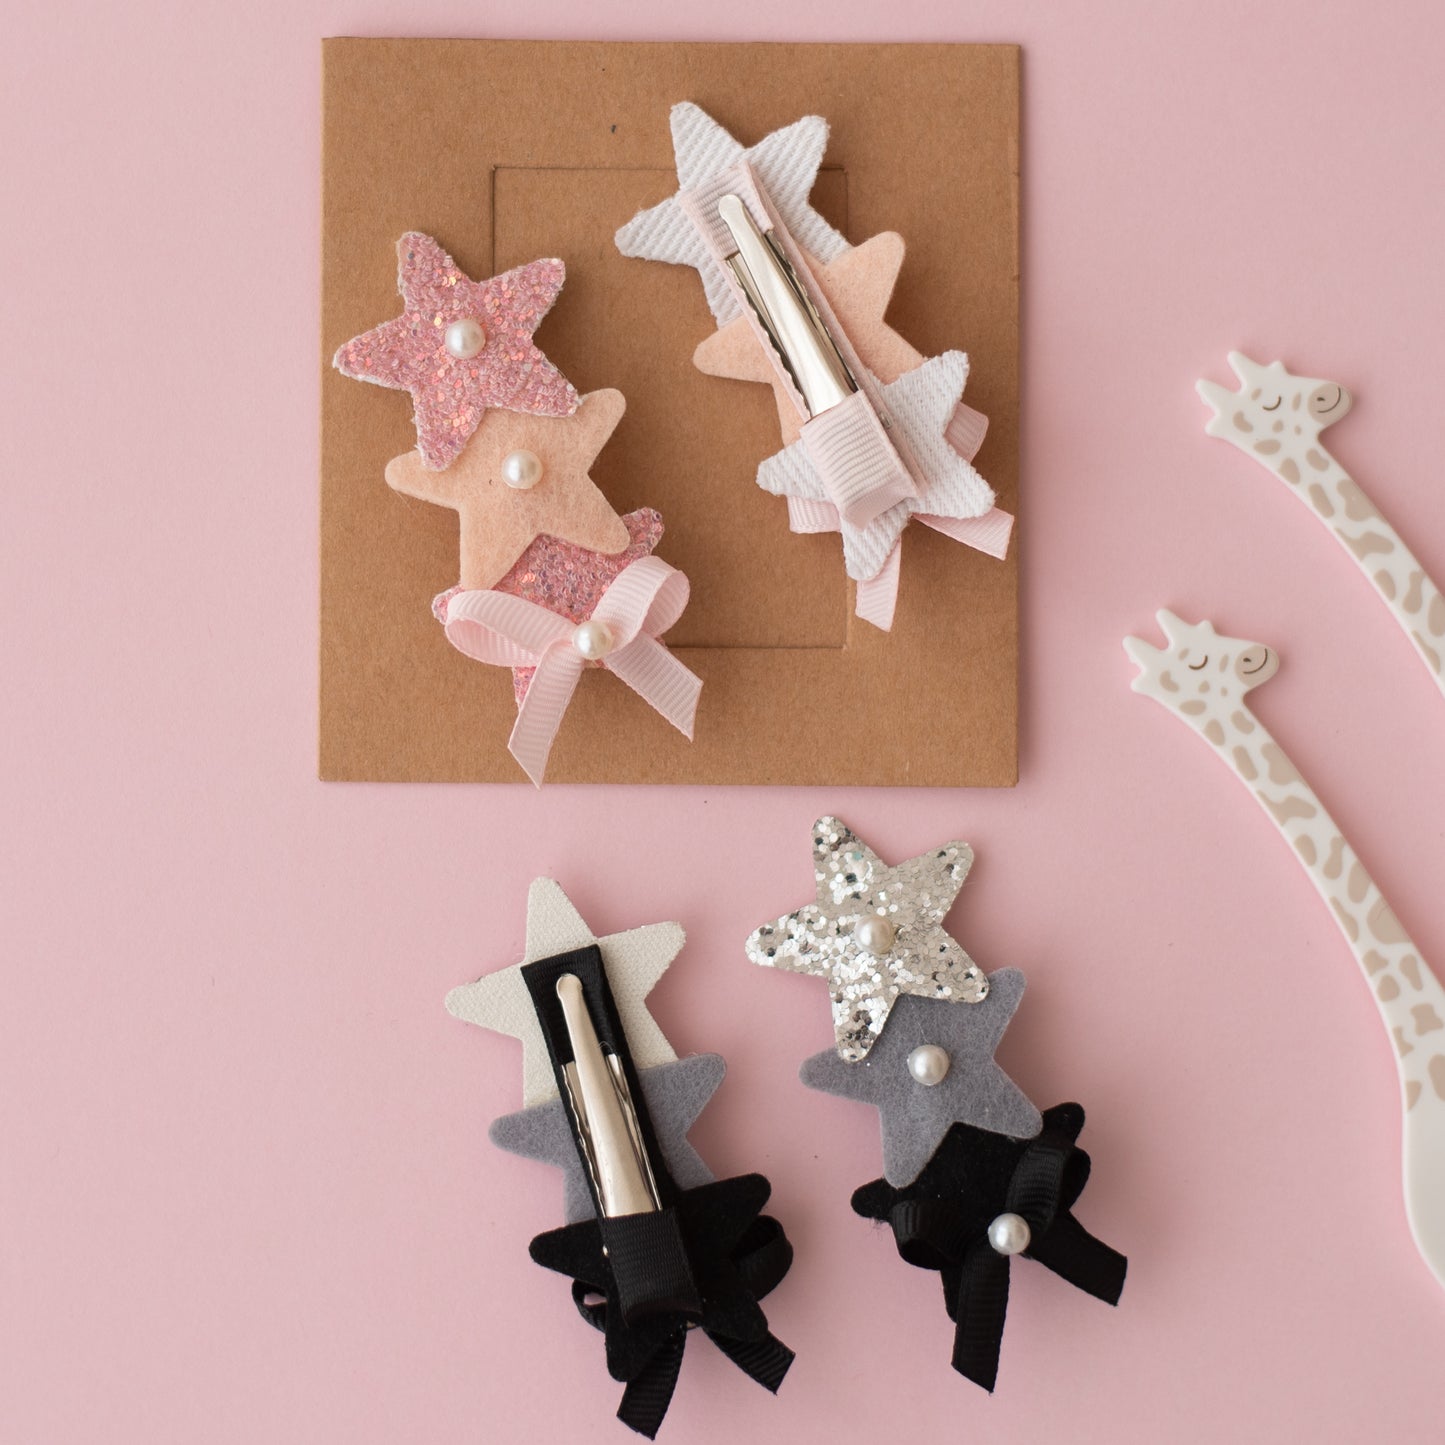 Cute glitter star alligator clips embellished with pearls and small bows  - Peach, Black, Silver